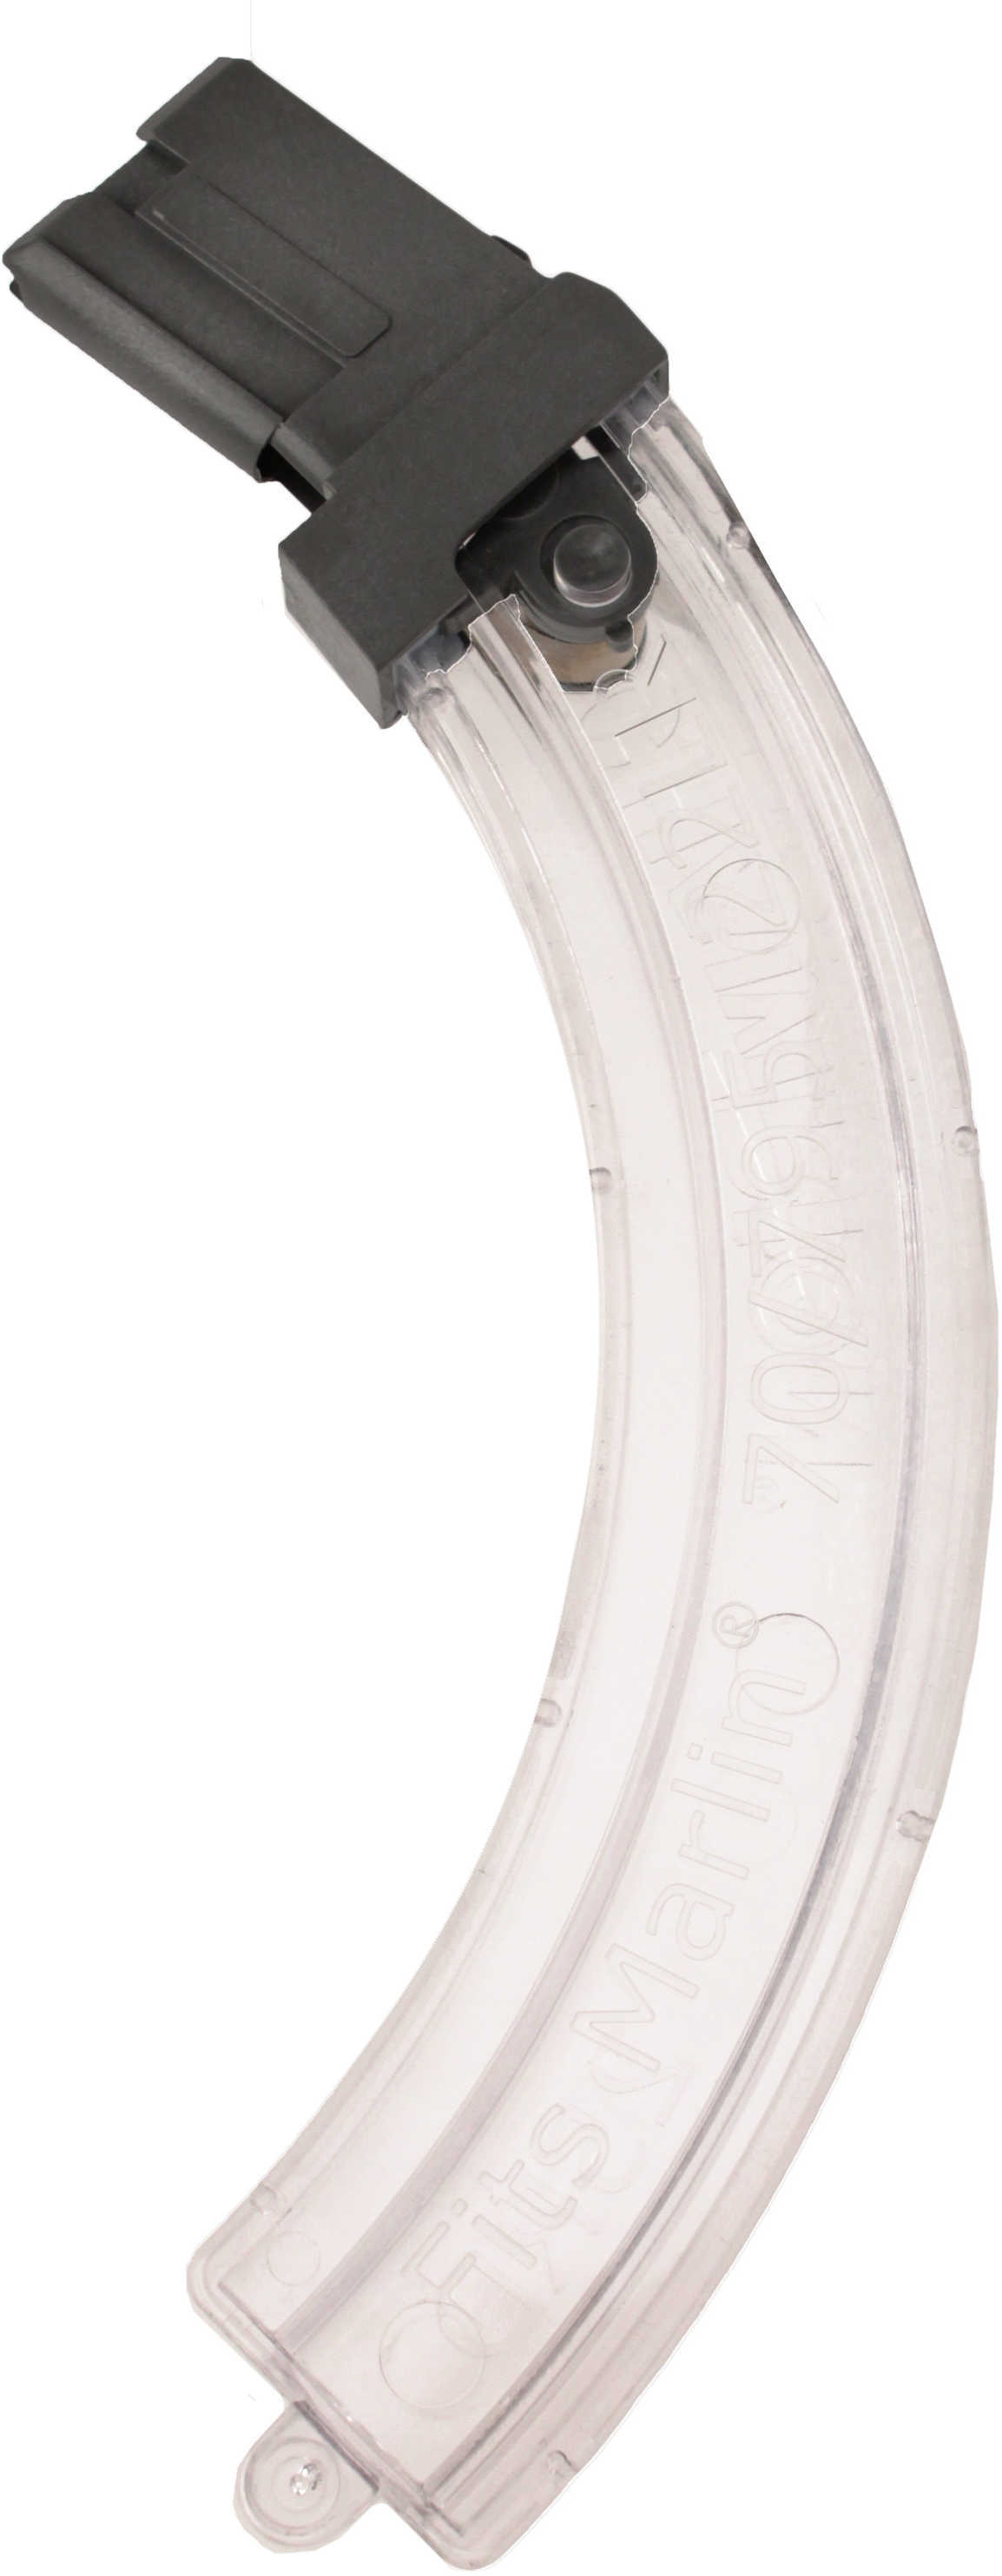 Champion Traps and Targets Marlin 795 25 Round Magazine 40426